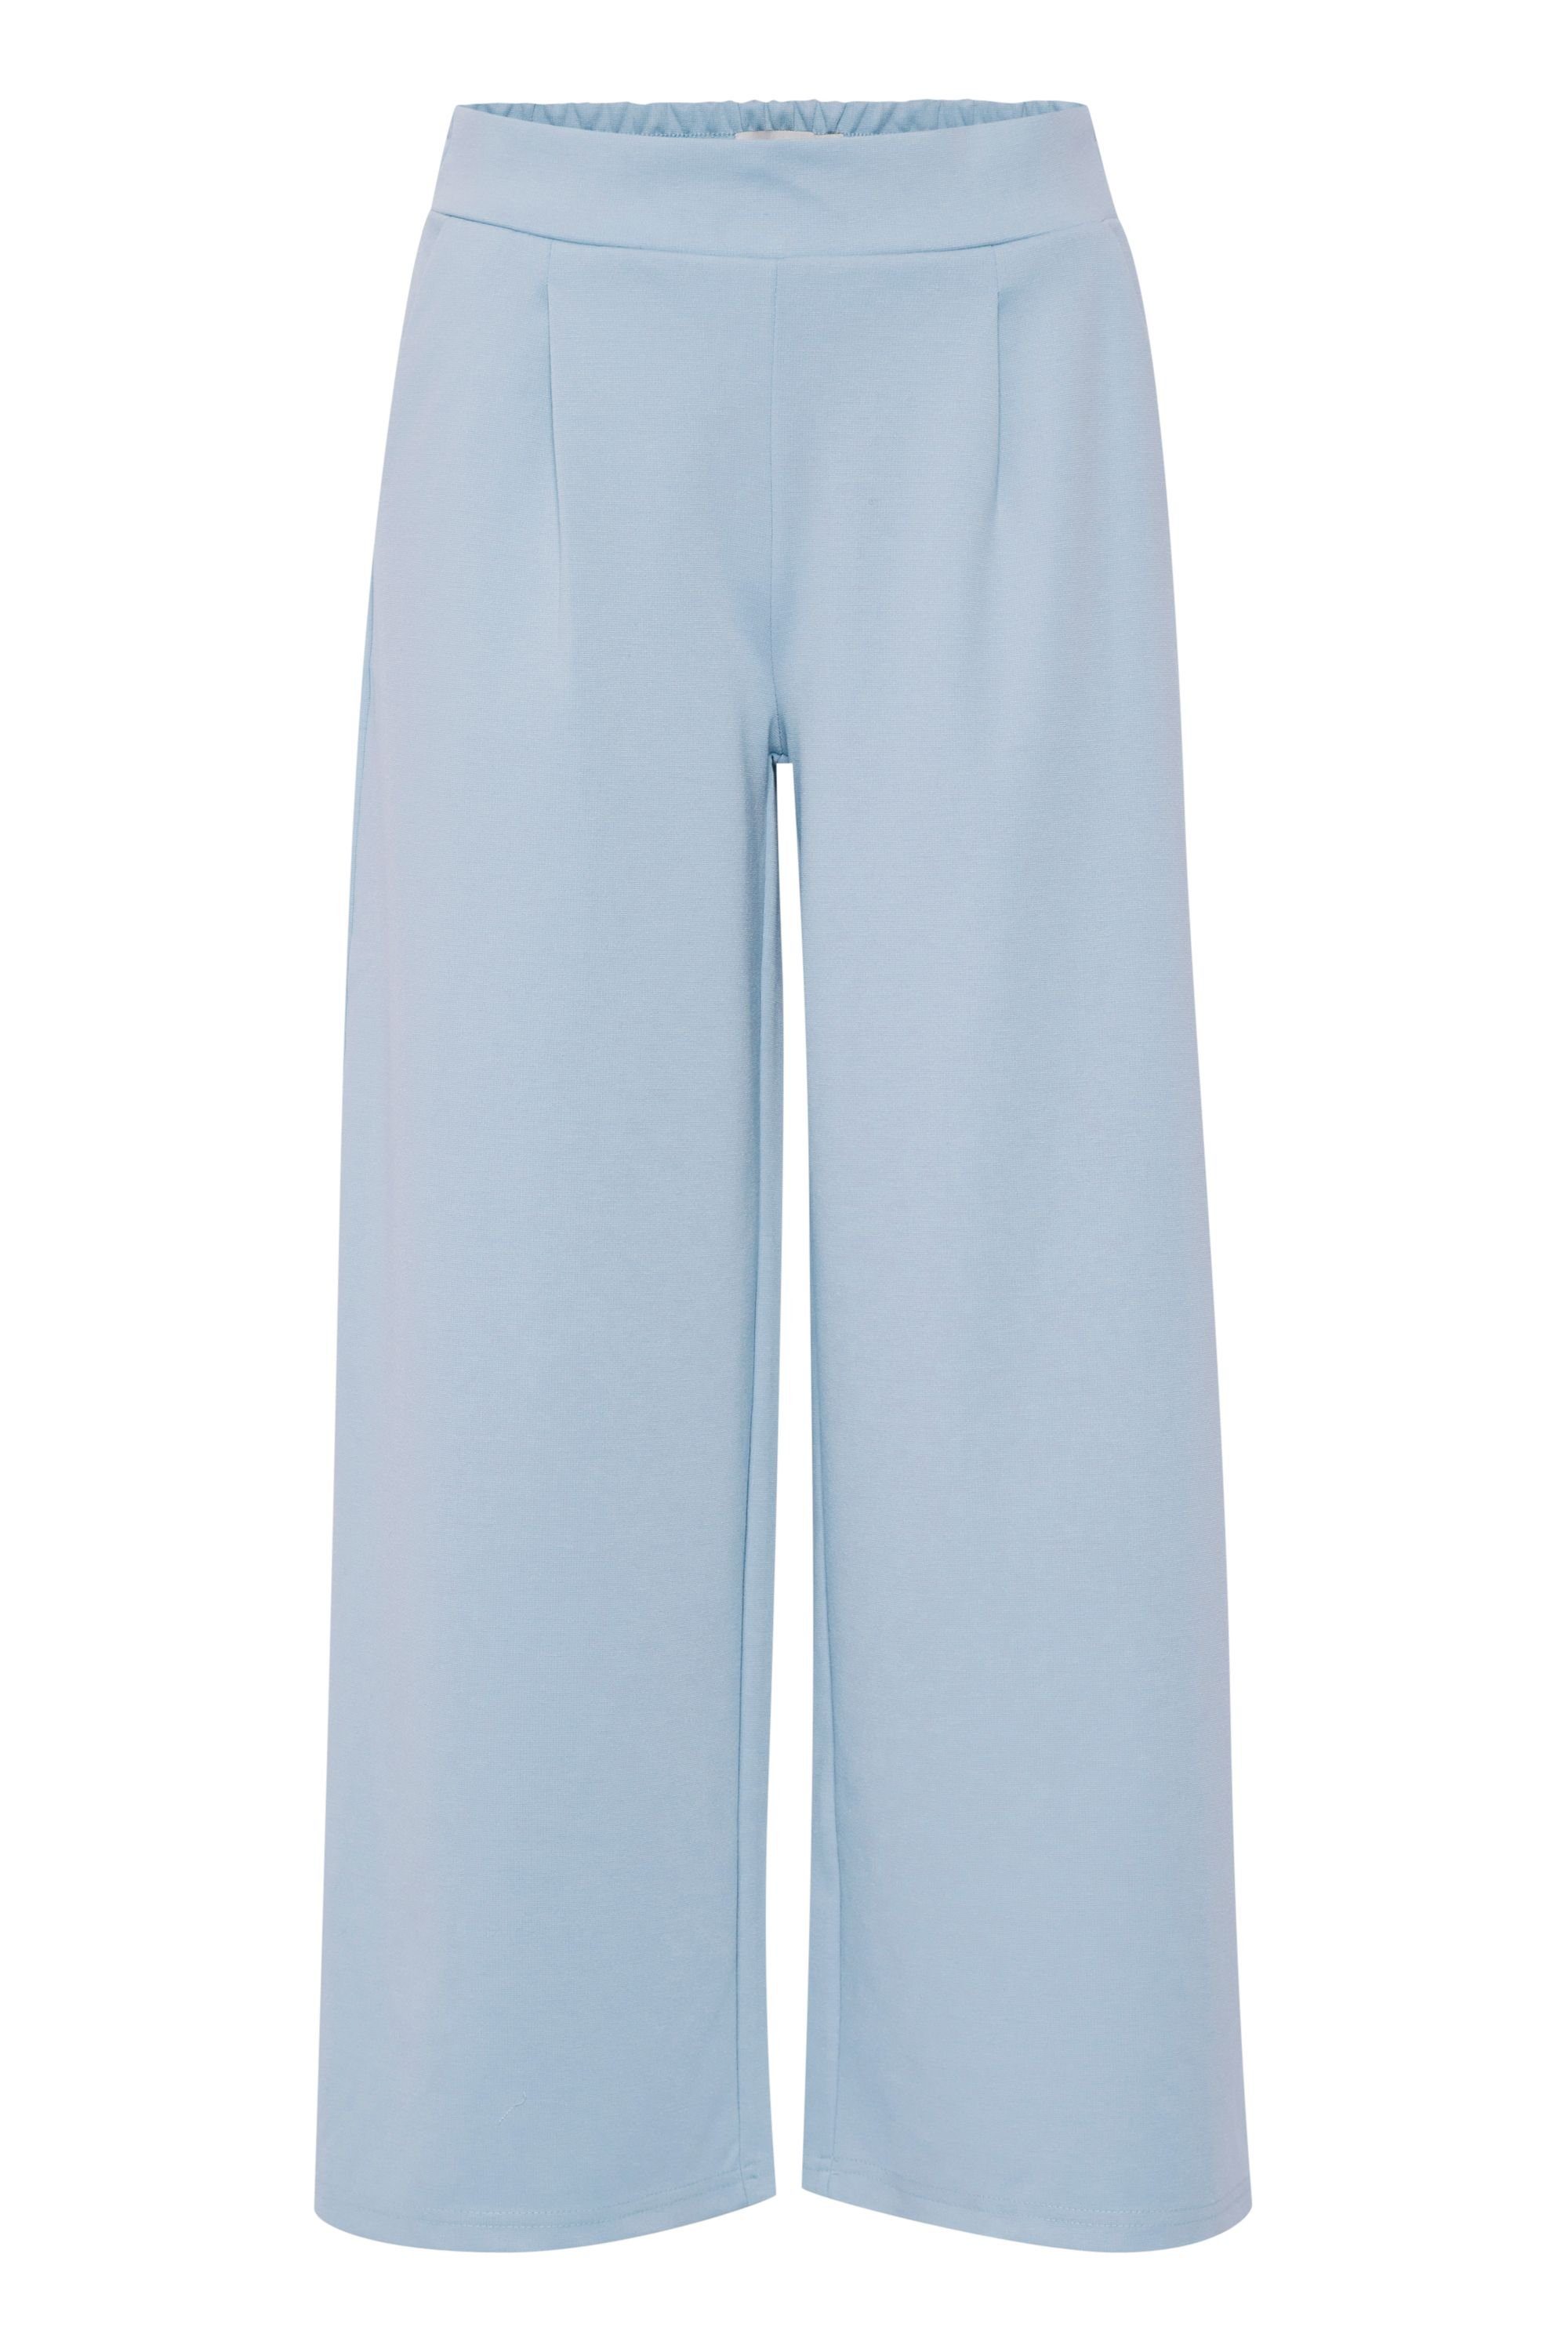 - Blue (154030) 20116301 WIDE geschnittene PA Ichi Leger SUS Chambray IHKATE Stoffhose Stoffhose